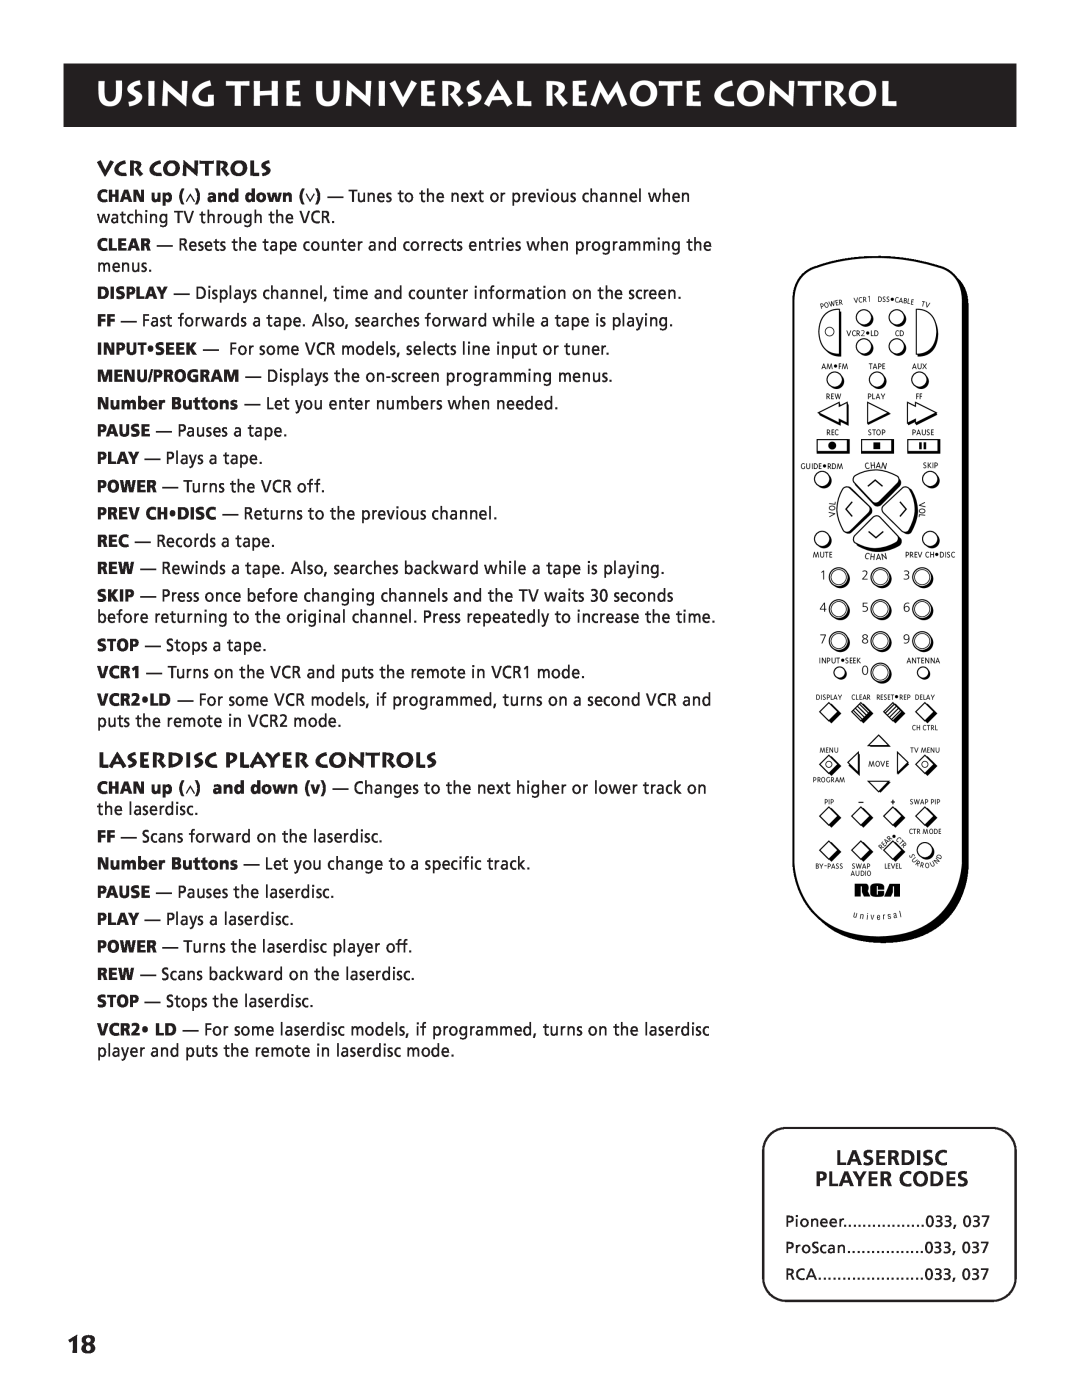 RCA RP-9380 manual Using The Universal Remote Control, Vcr Controls, Laserdisc Player Controls, Laserdisc Player Codes 